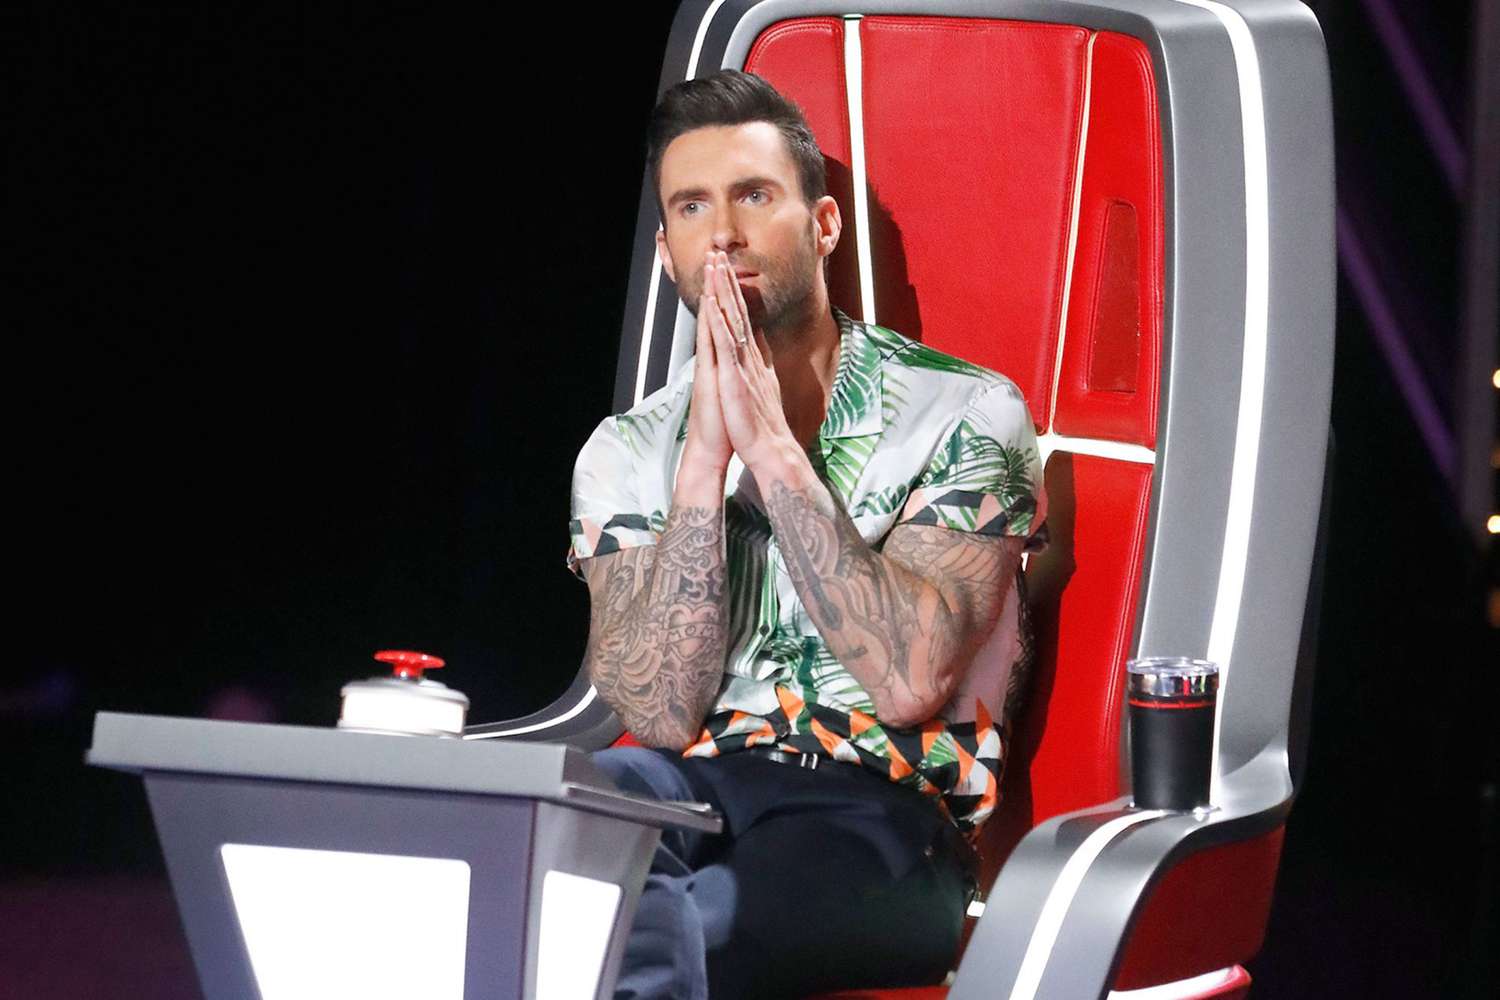 Adam Levine is returning to 'The Voice' for a season finale performance